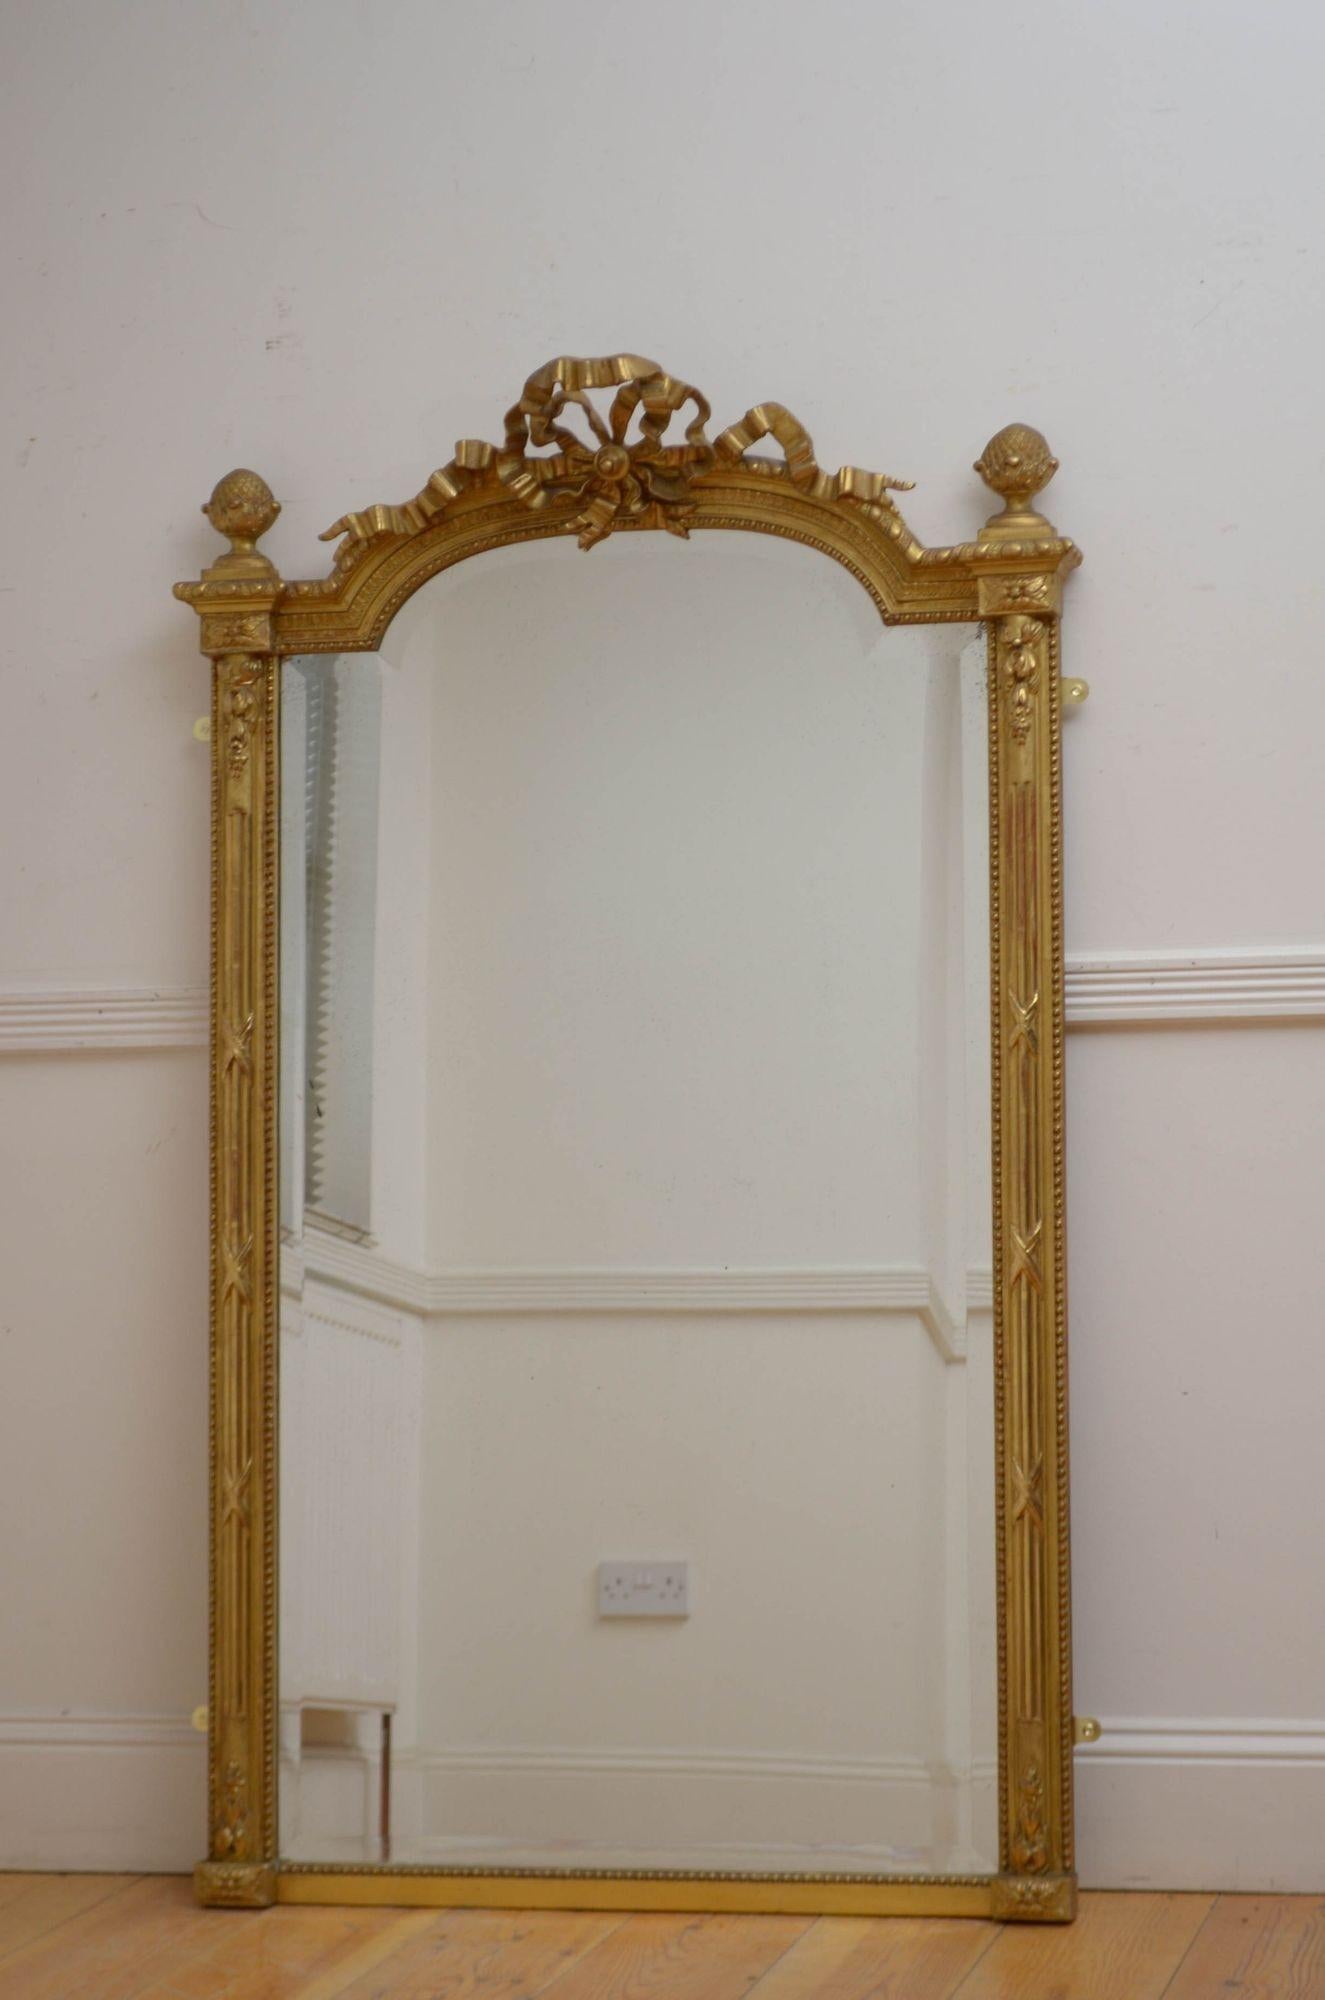 Sn5542 Very elegant turn of the century gilded wall mirror or console table mirror, having original bevelled edge glass with some foxing in arched and beaded with bow crest to the centre flanked by acorn finials, reeded half columns and decorative